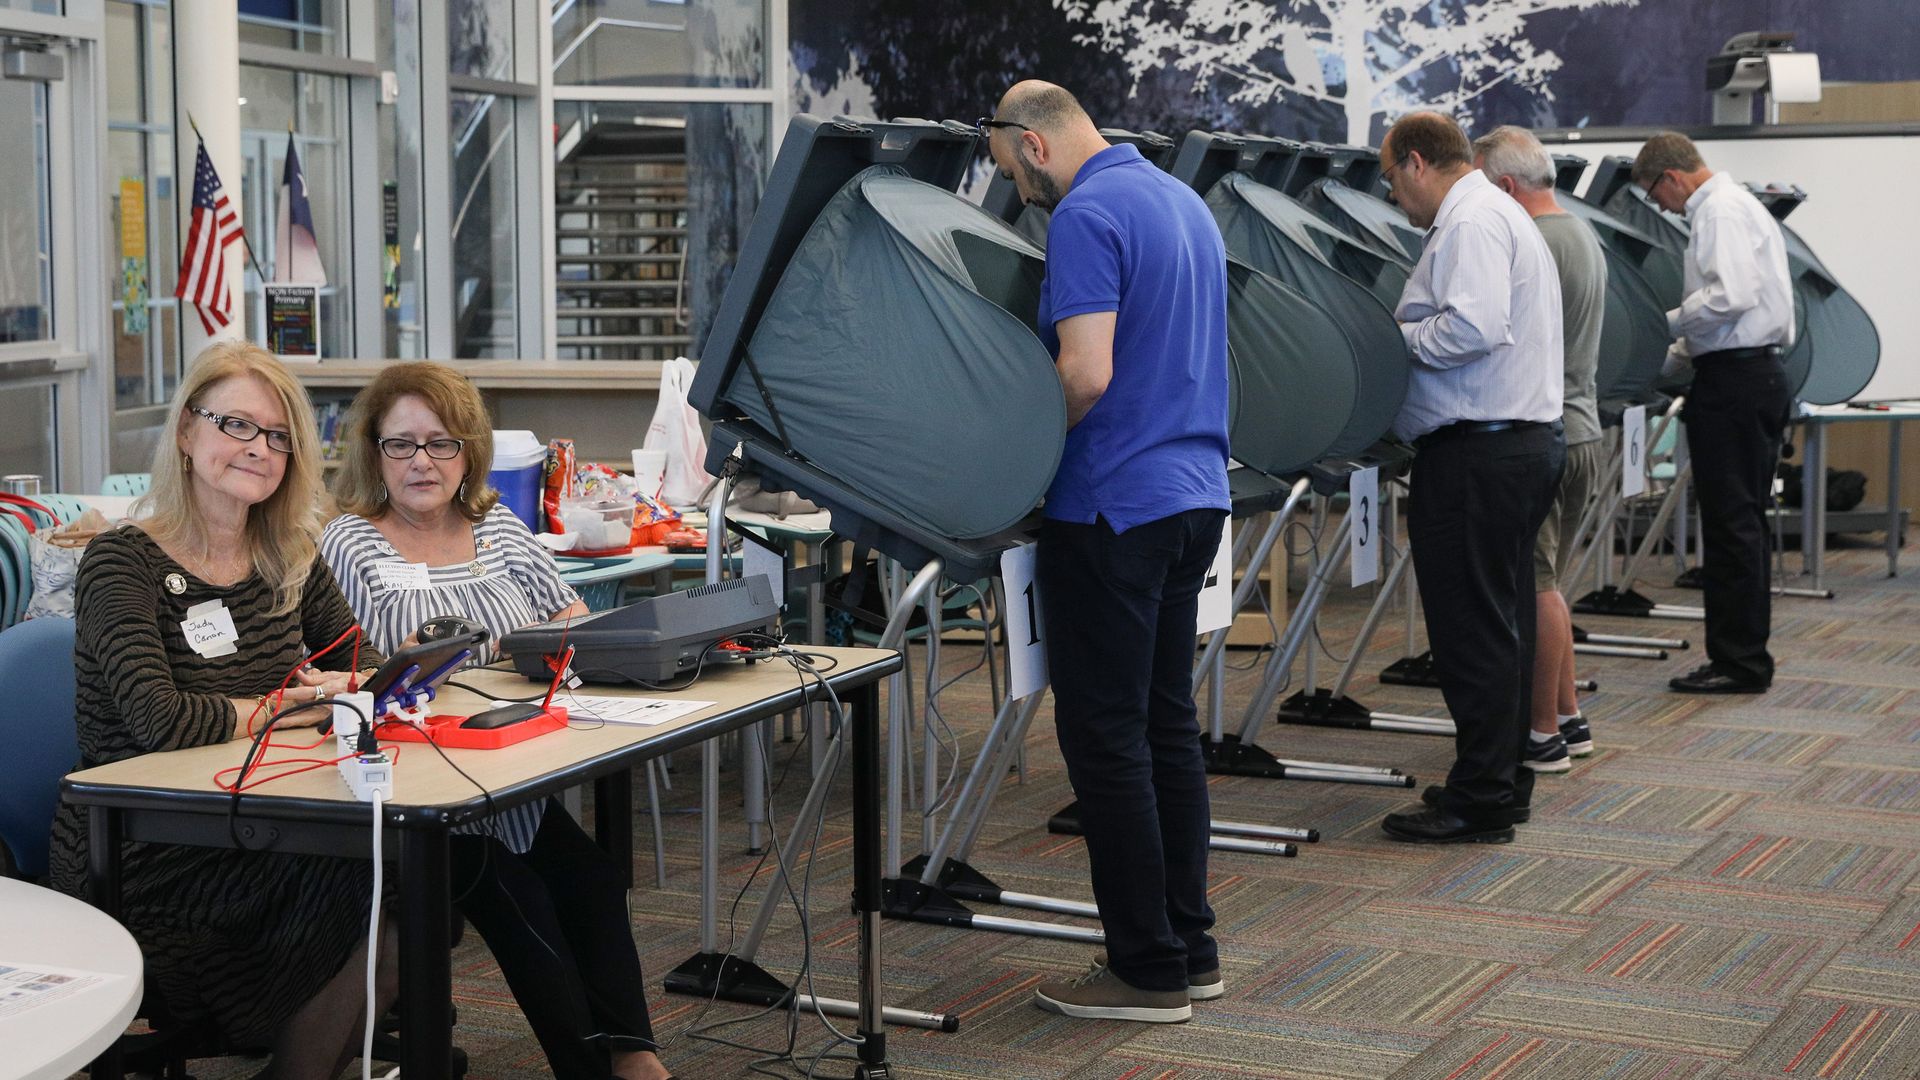 Voters cast their ballots Tuesday. Photo: Loren Elliott/Getty Images